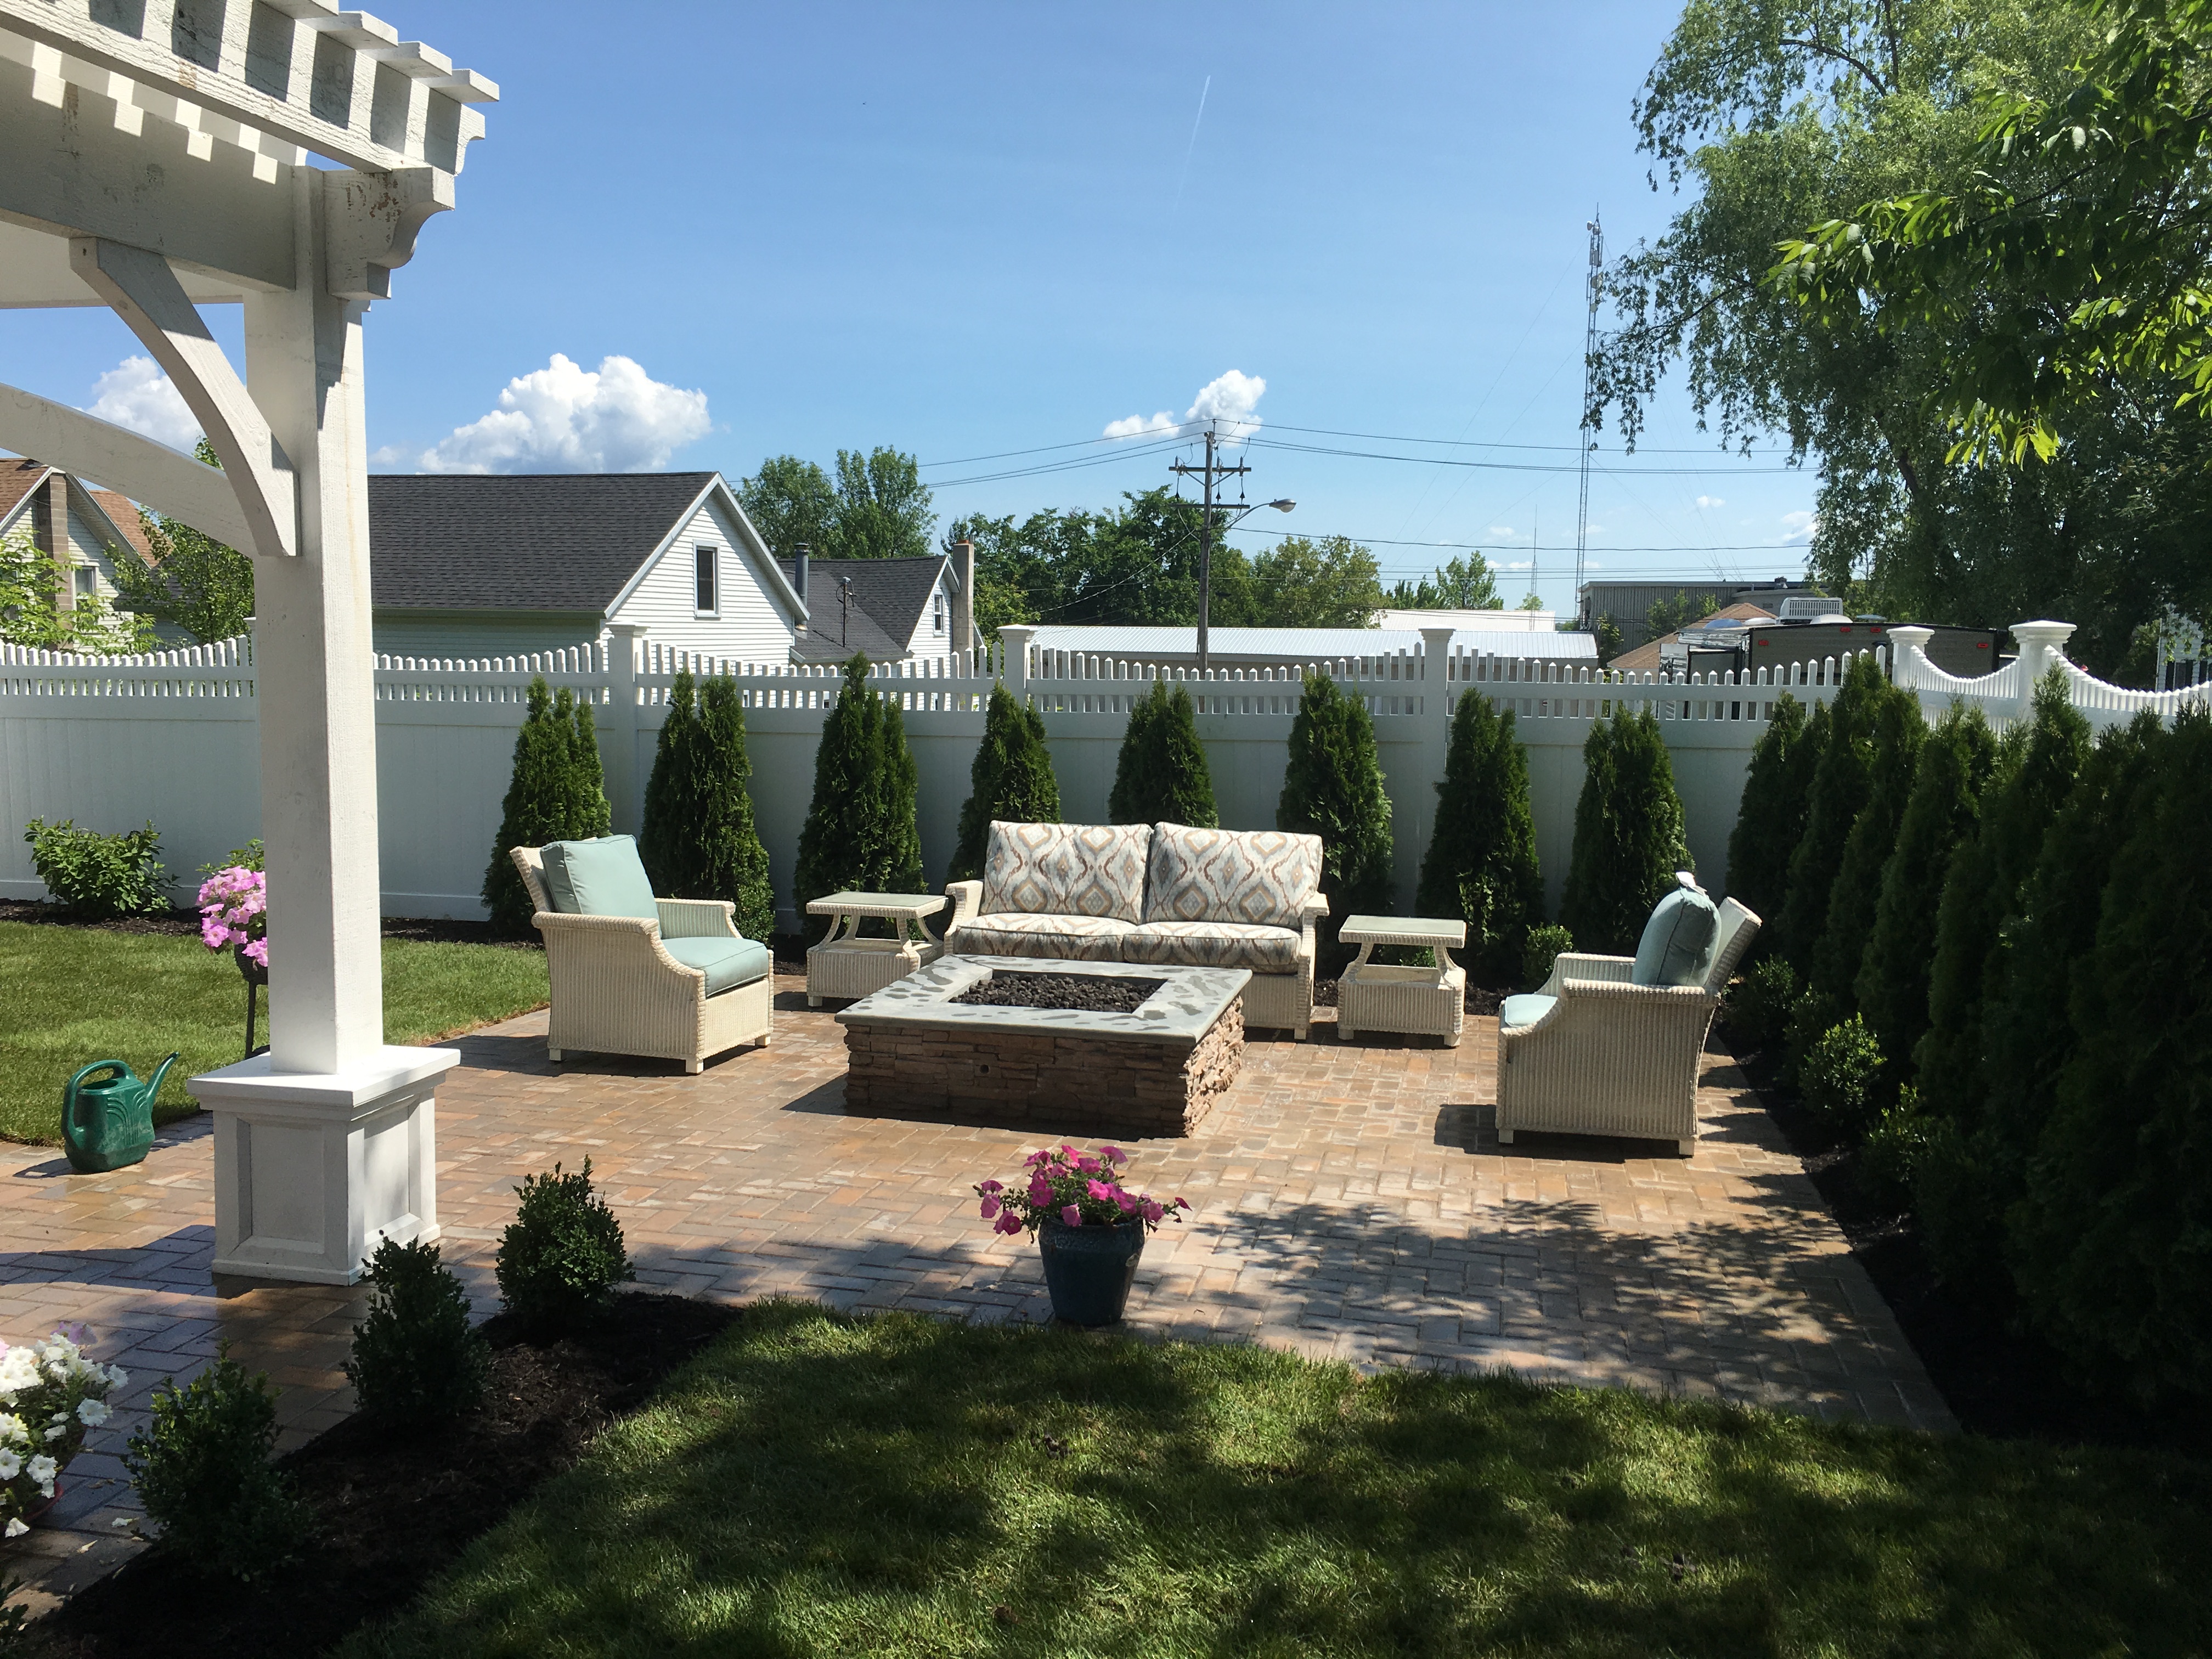 Paver Patio with Fire Pit and Hedge